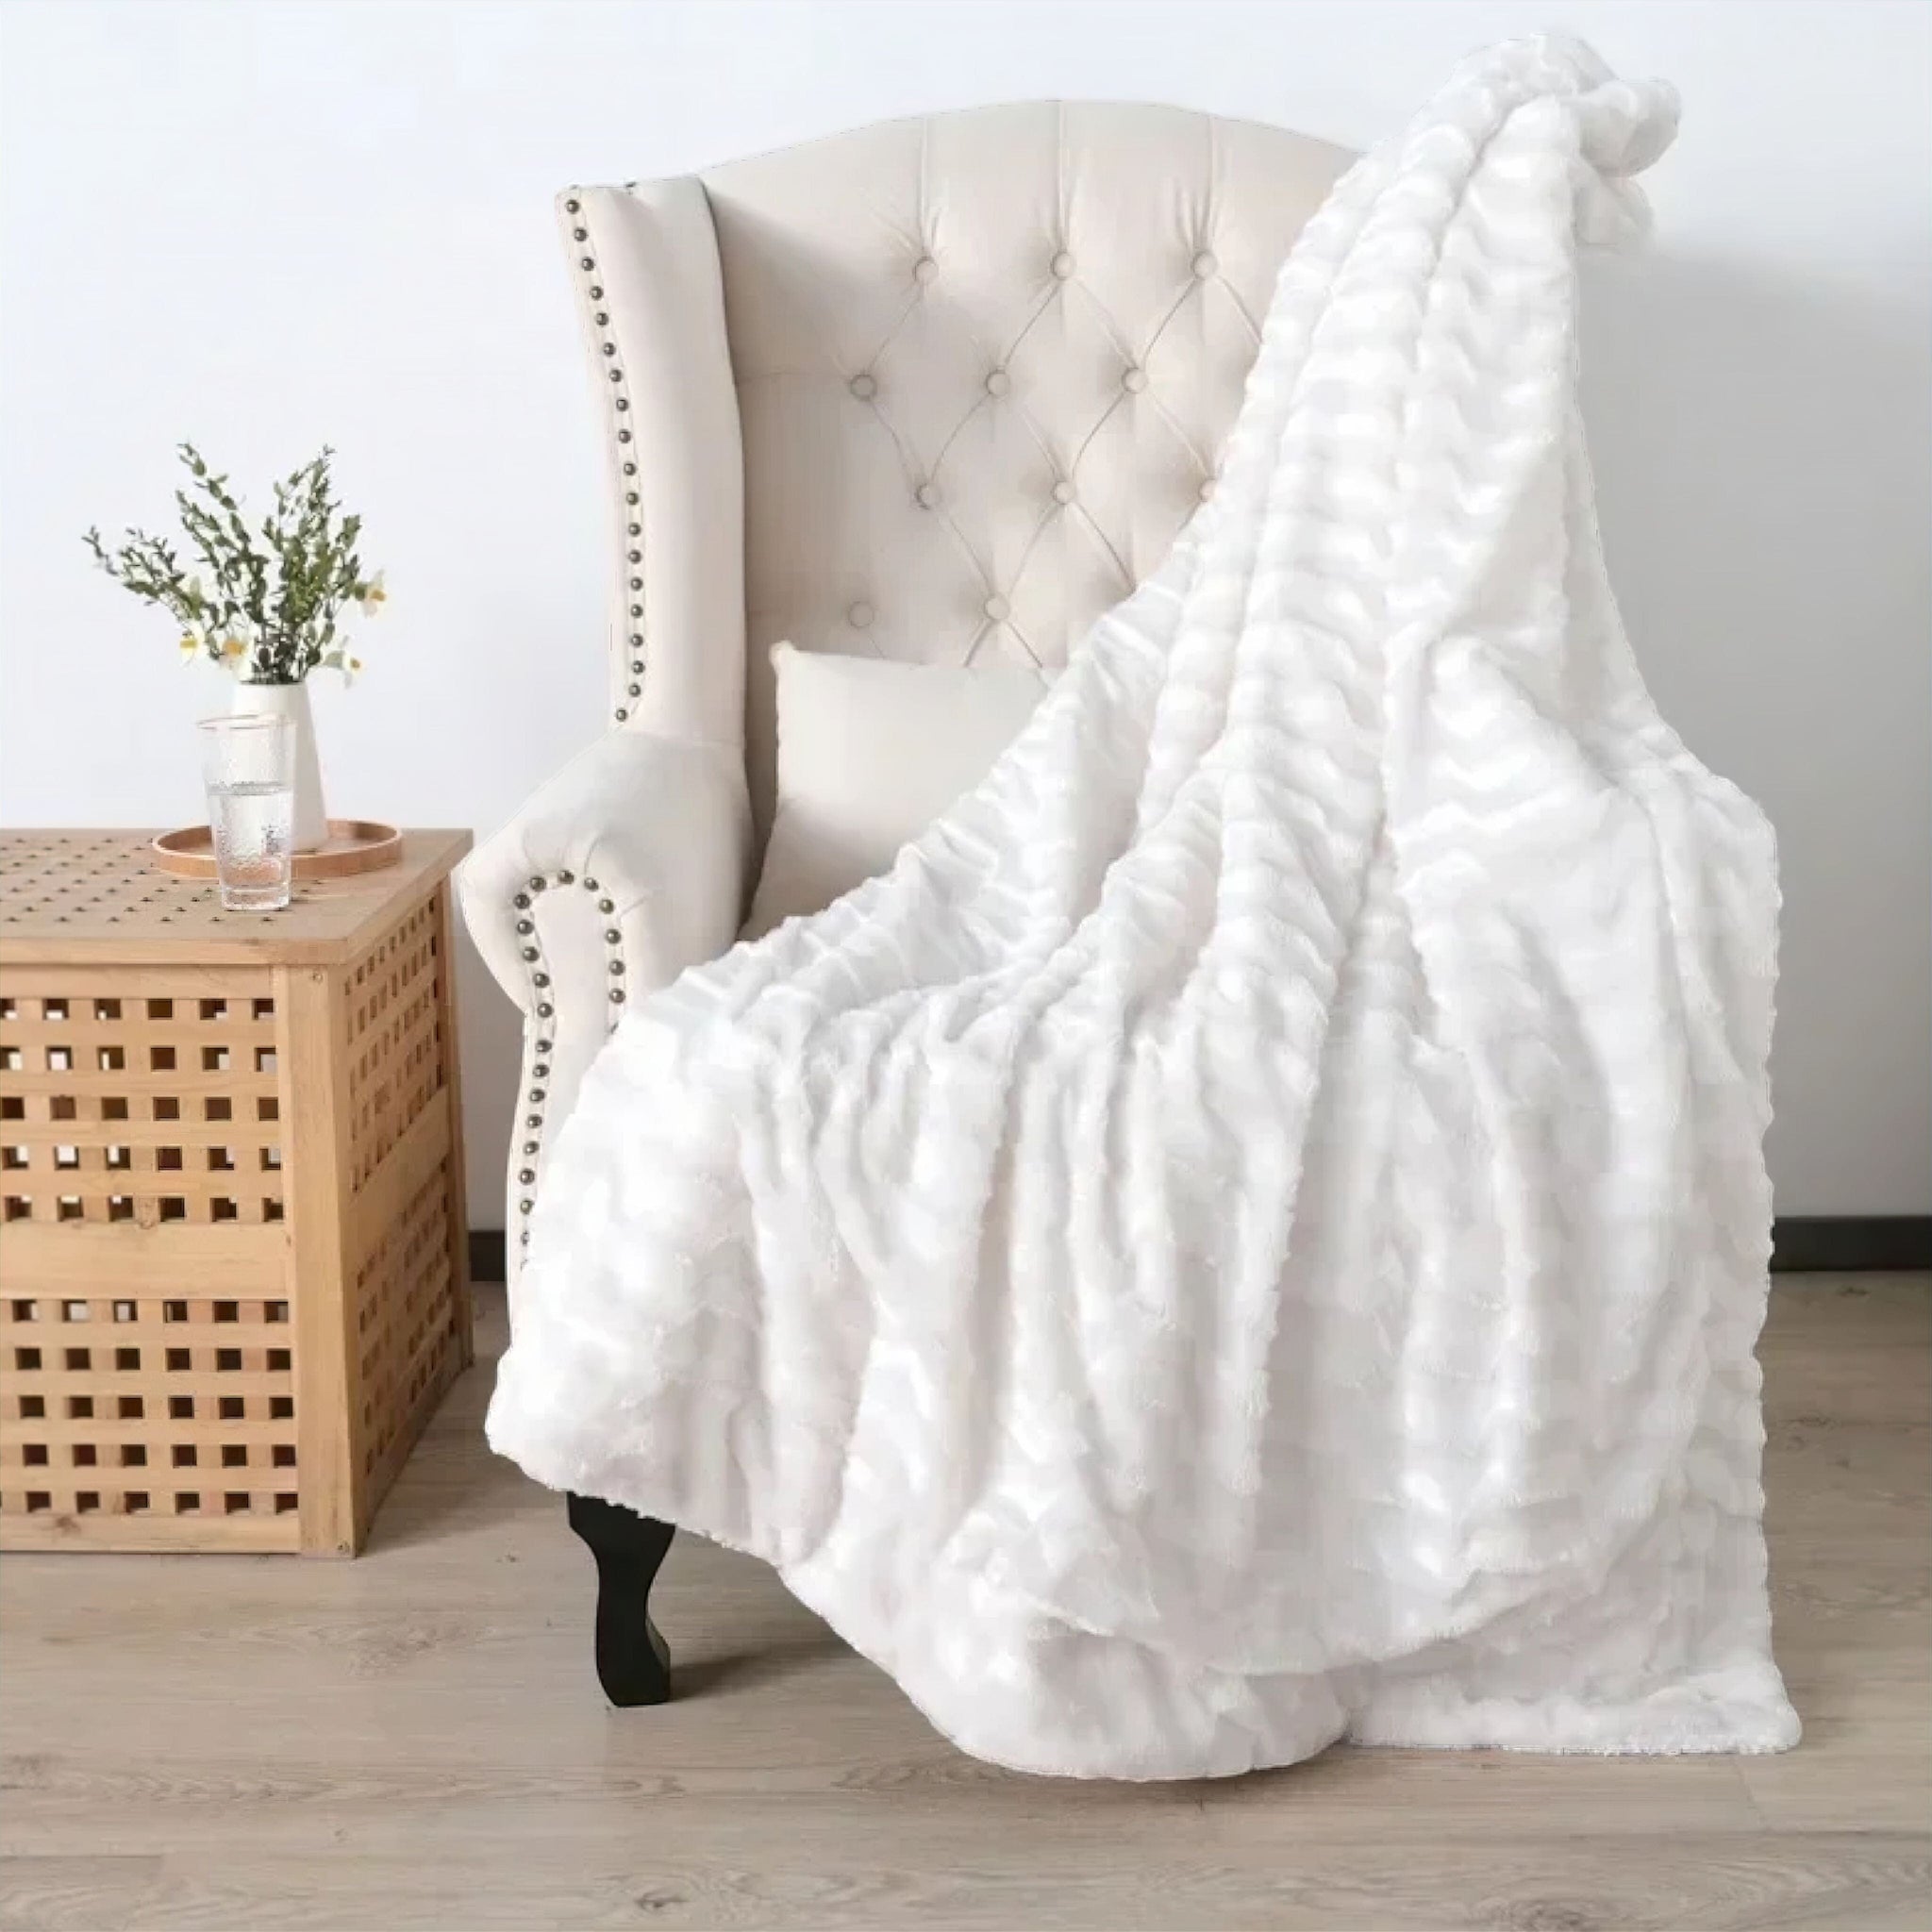 Charles Fur Blanket Collection E 120 x 150cm 